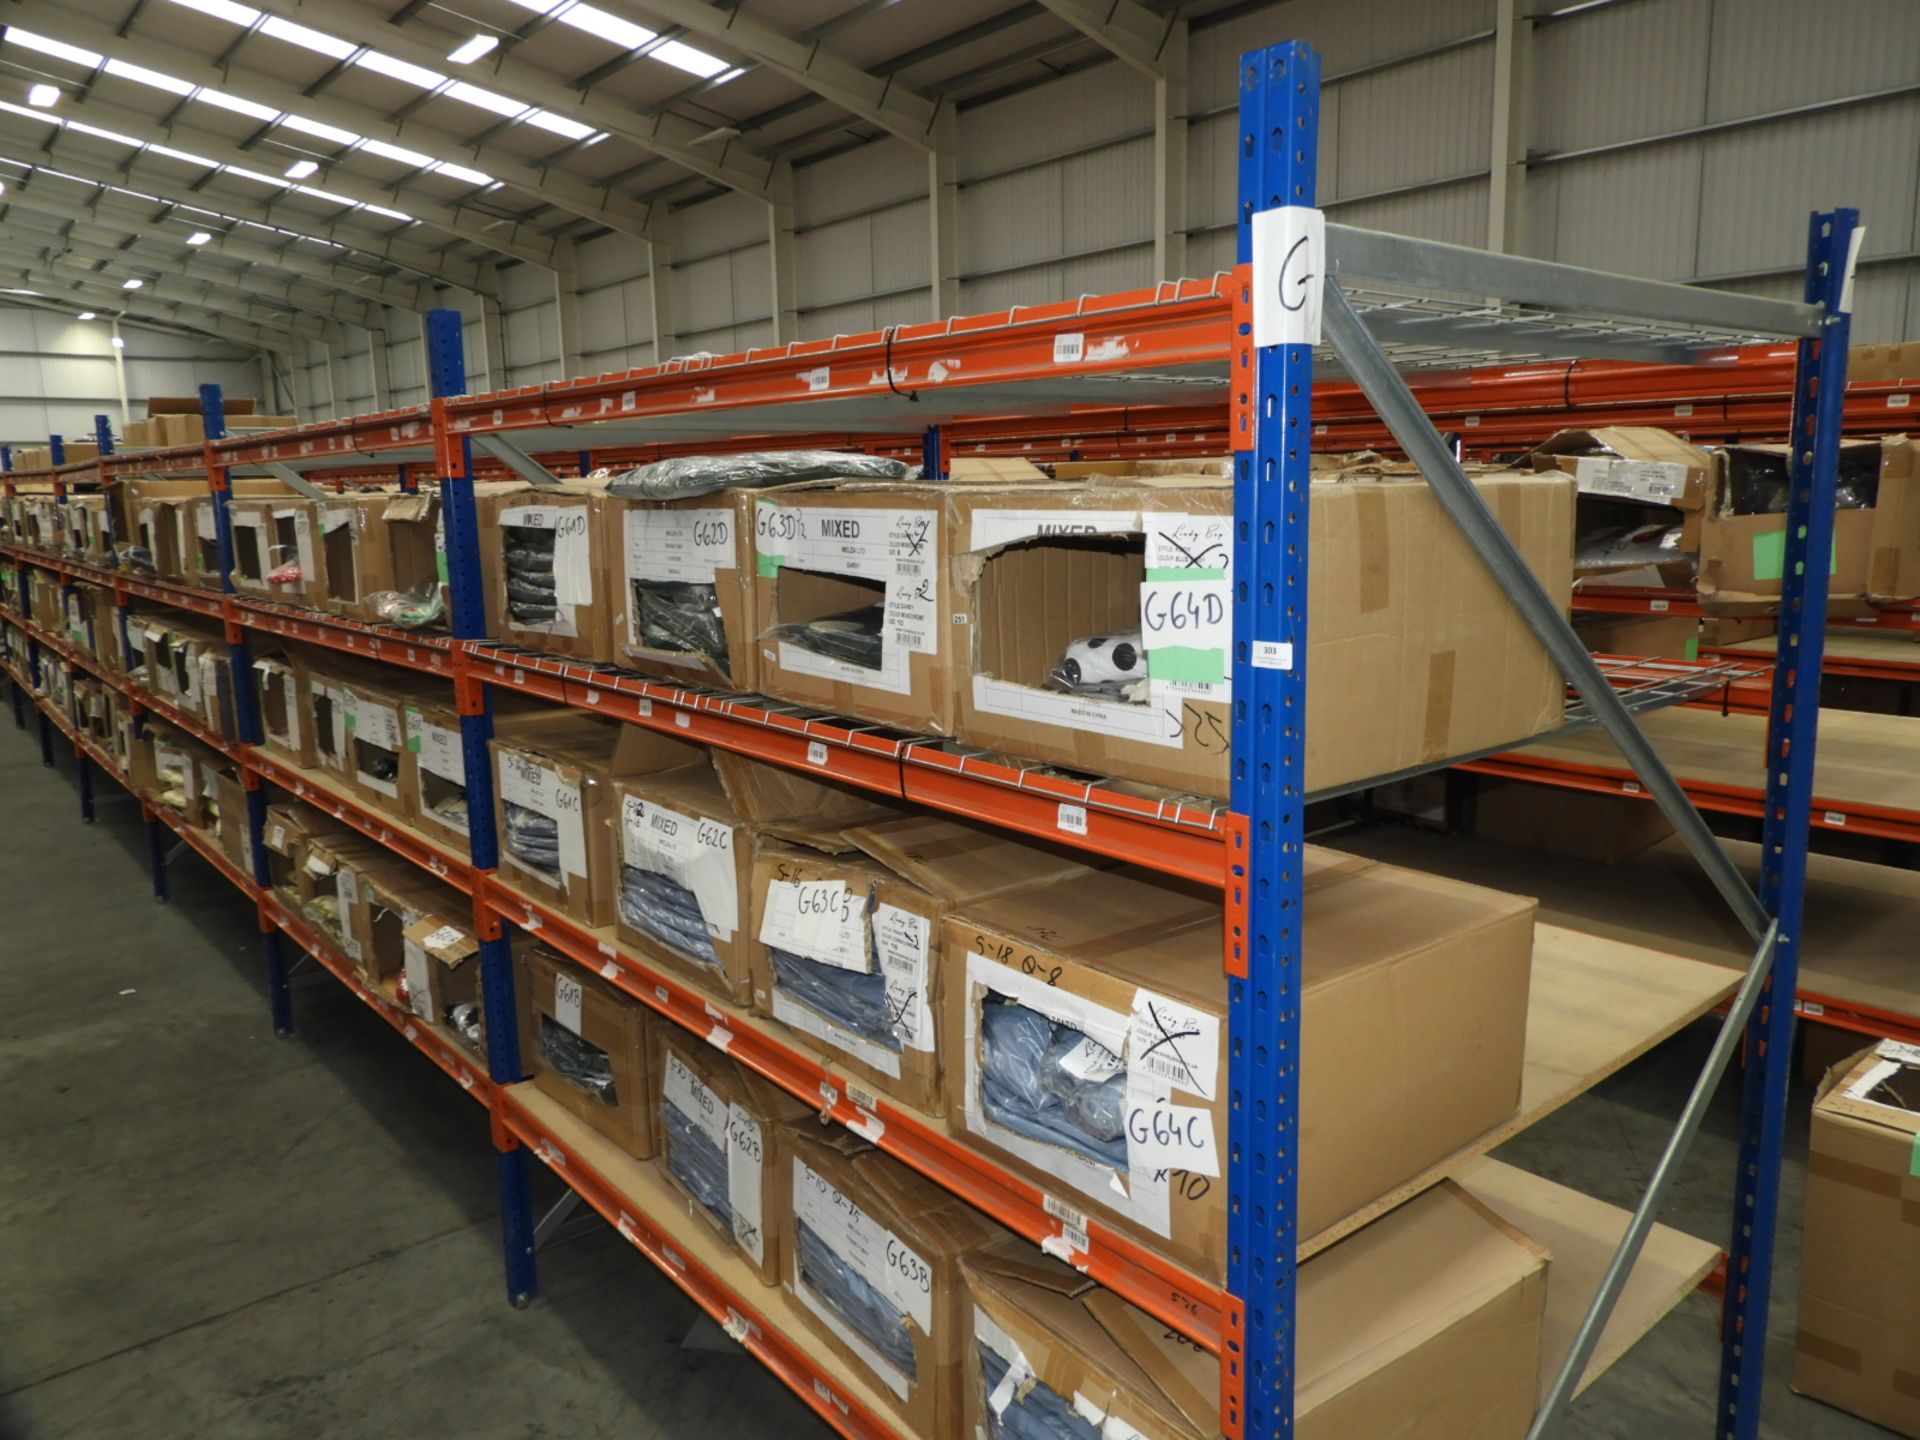 *10 Bays of Medium Duty Merchandise Racking Comprising of 11 Uprights and 80 Beams - 6ft Wide x 4ft